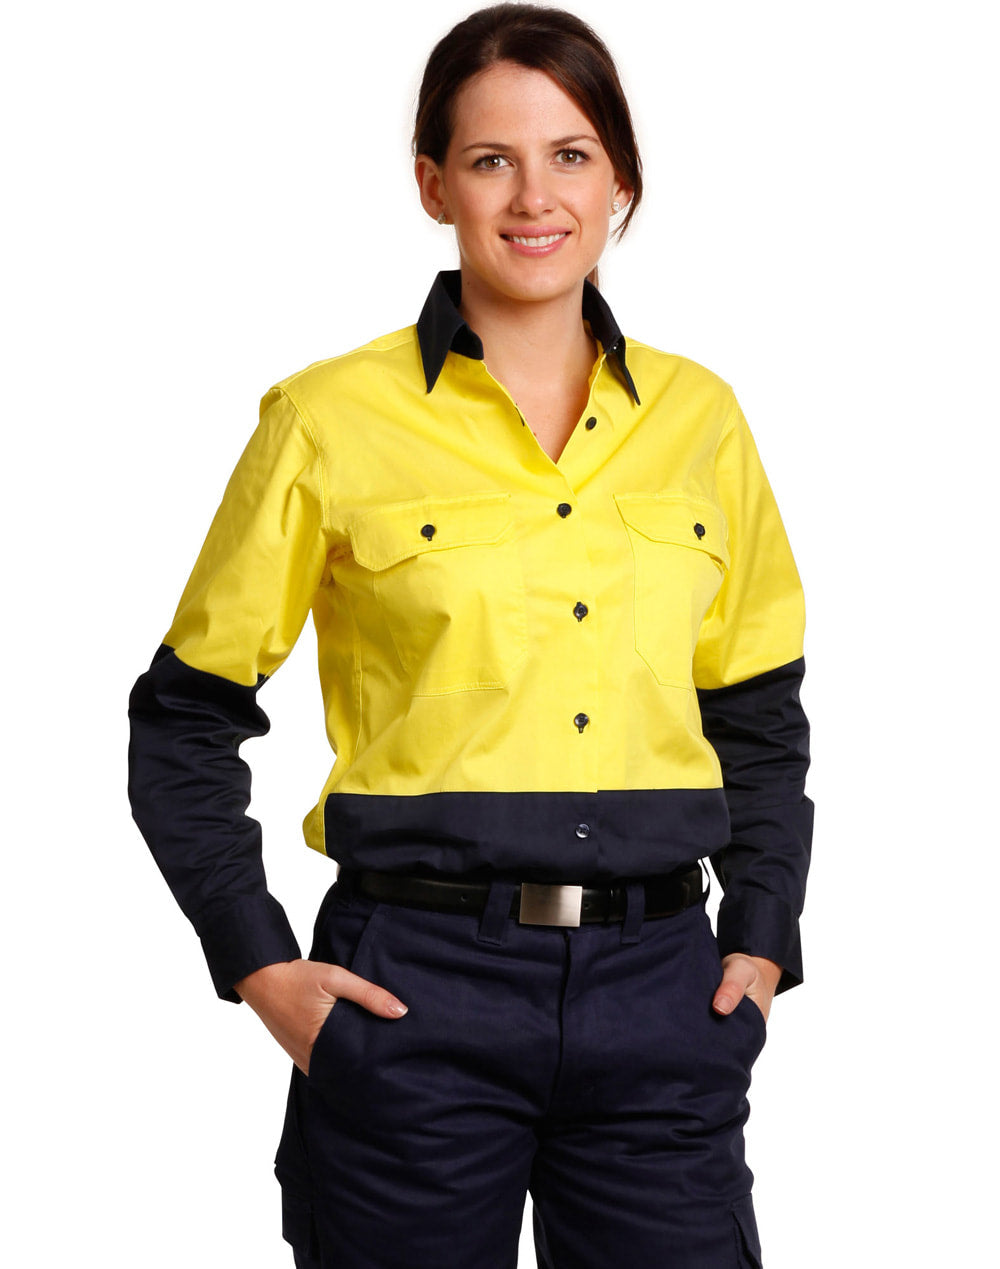 AIW SW64 WOMEN'S LONG SLEEVE SAFETY SHIRT